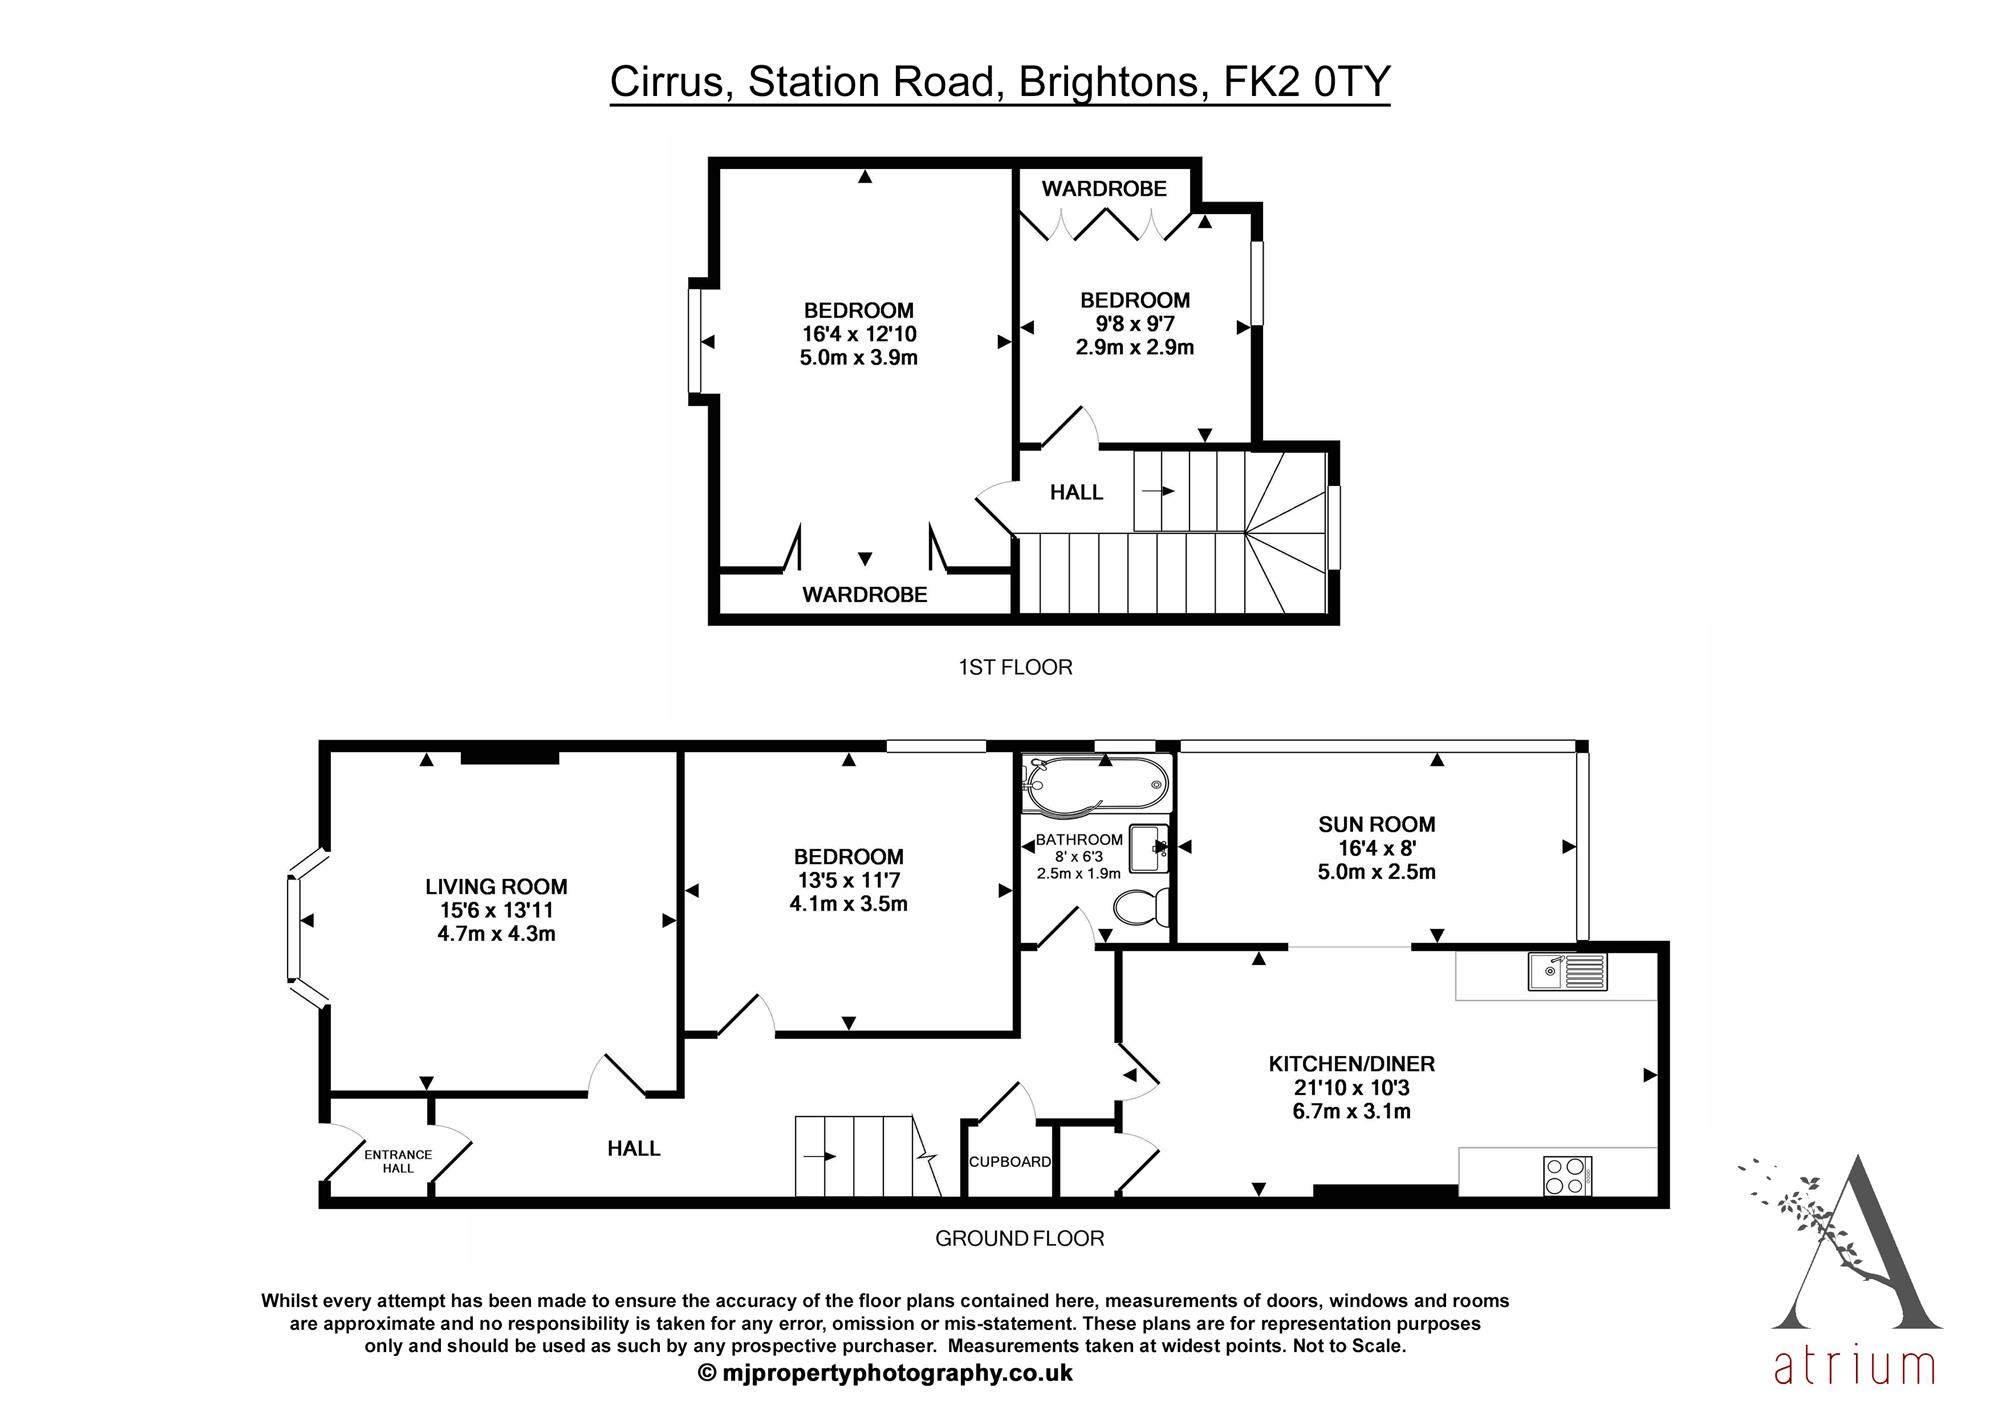 3 Bedrooms Semi-detached house for sale in Cirrus, Station Road, Falkirk FK2